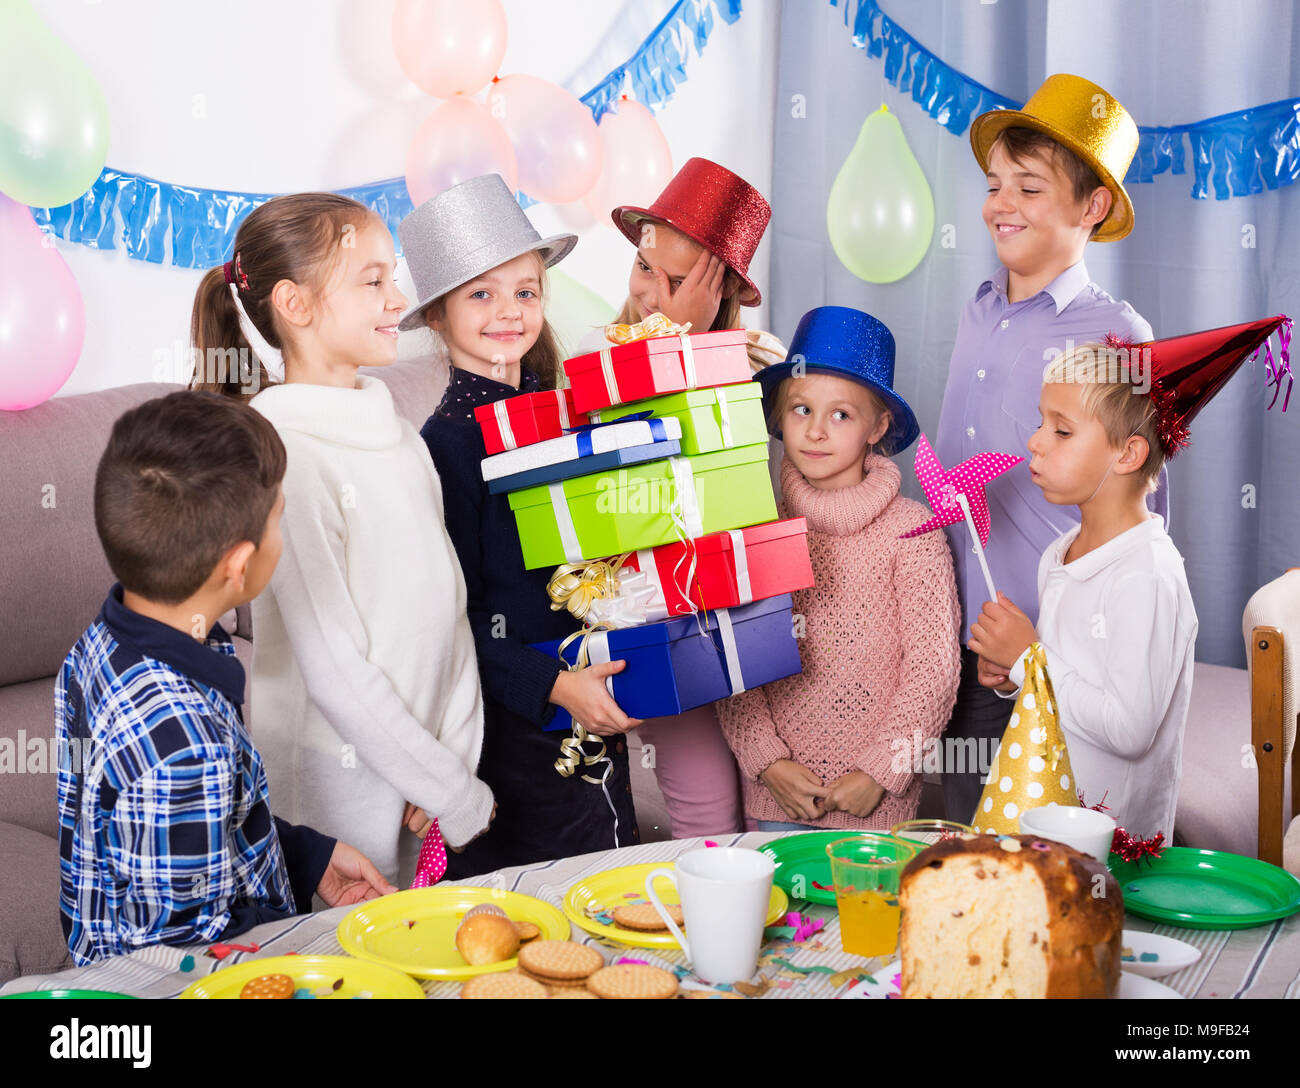 Boys and girls handing presents to birthday girl during party Stock ...